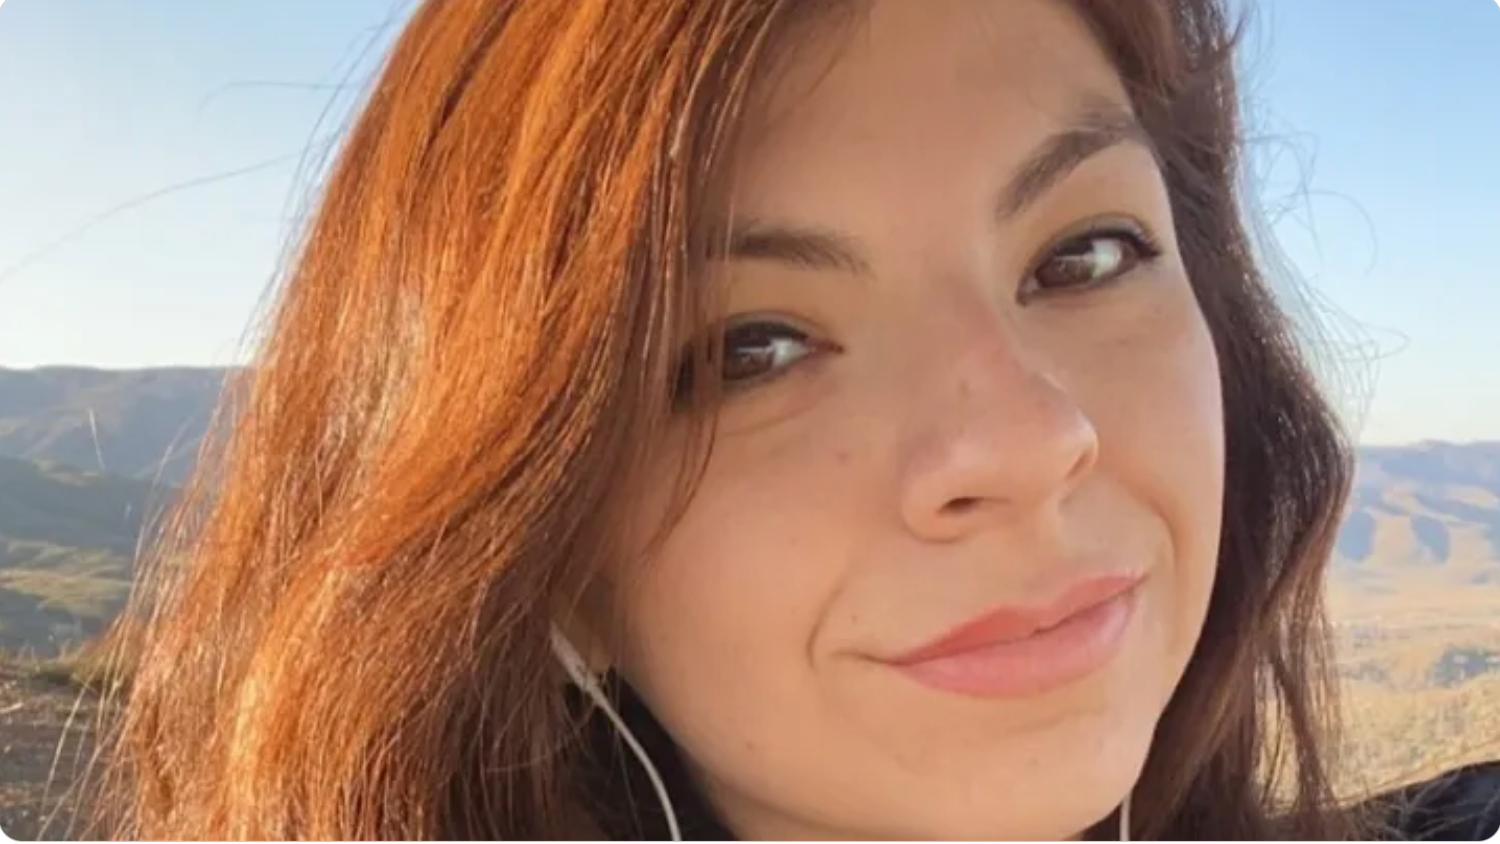 Veronica Aguilar, 27, was found dead in the burned out trunk of a car in Lancaster, California